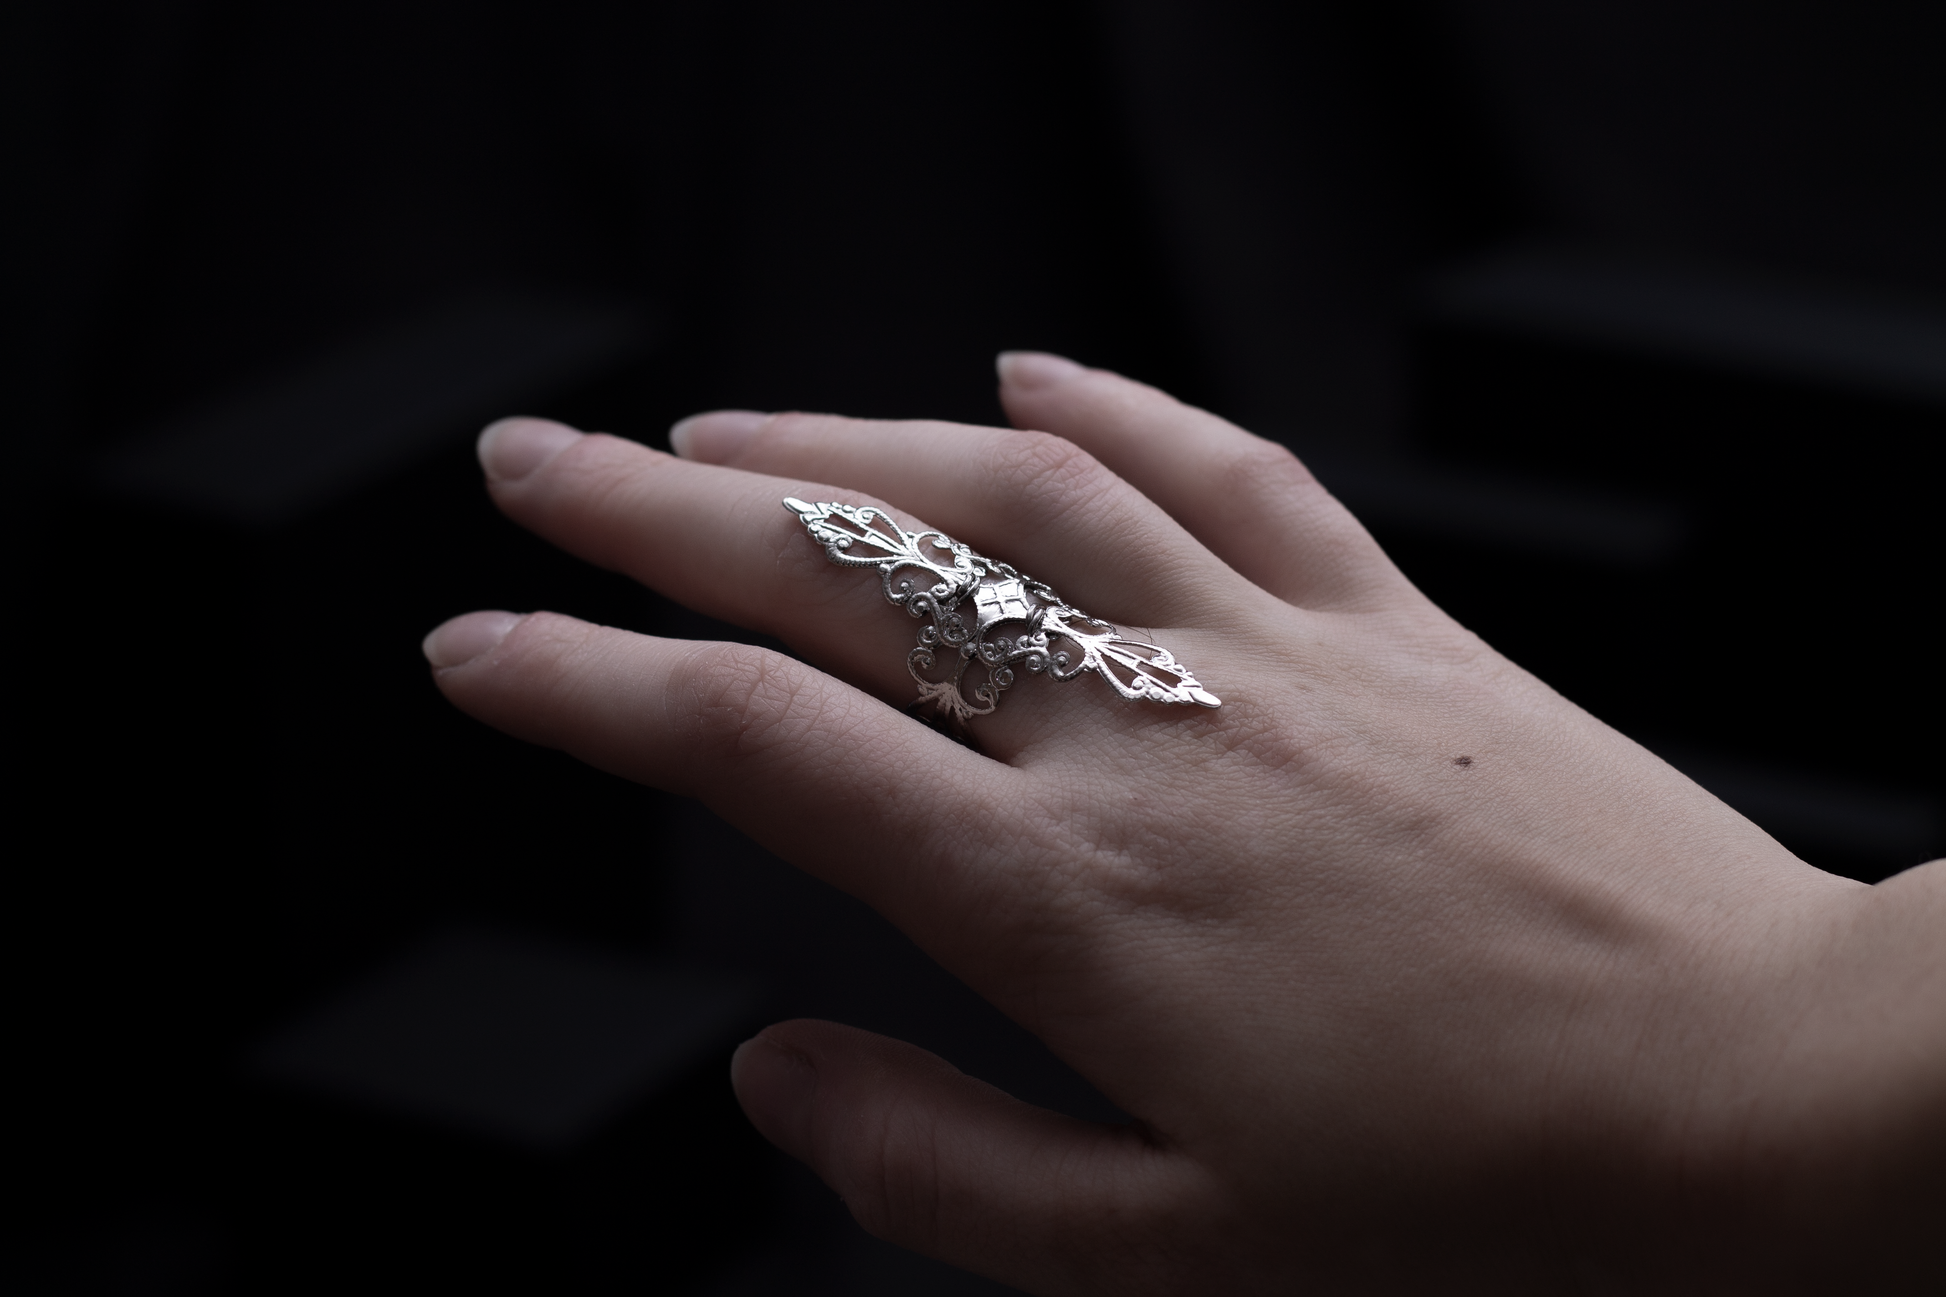 A woman's hand elegantly displaying a silver filigree full-finger midi ring against a dark background with geometric shapes, embodying a sophisticated gothic style.